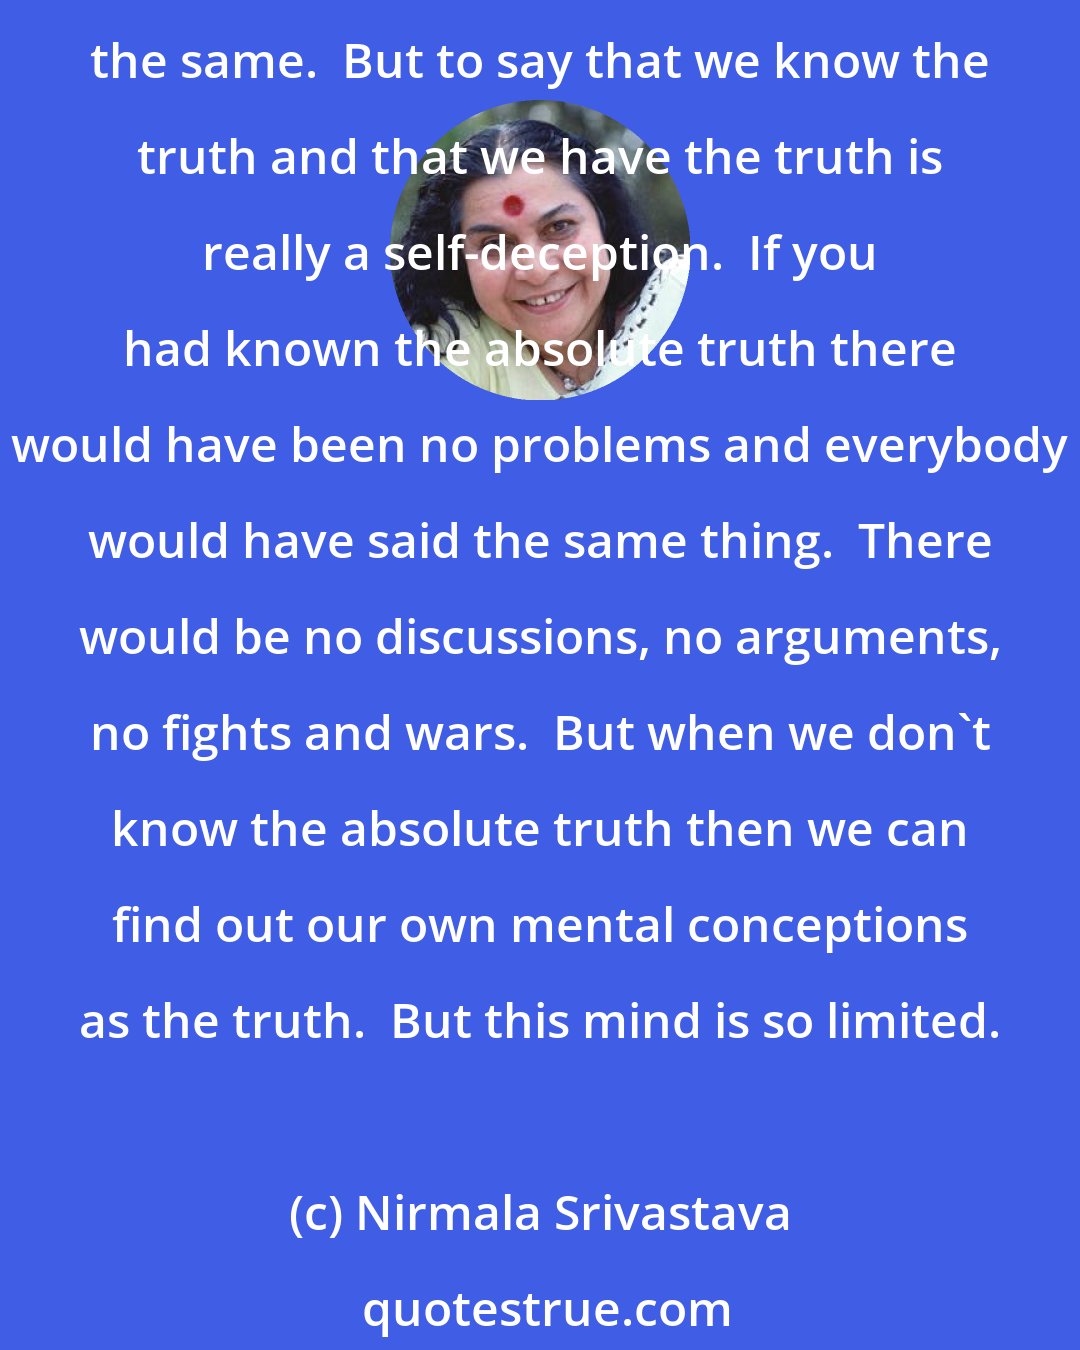 Nirmala Srivastava: At the very outset I have to tell you that truth is what it is.  You cannot mold it, you cannot change it.  It is always the same.  It has been the same, it is the same, it will be the same.  But to say that we know the truth and that we have the truth is really a self-deception.  If you had known the absolute truth there would have been no problems and everybody would have said the same thing.  There would be no discussions, no arguments, no fights and wars.  But when we don't know the absolute truth then we can find out our own mental conceptions as the truth.  But this mind is so limited.